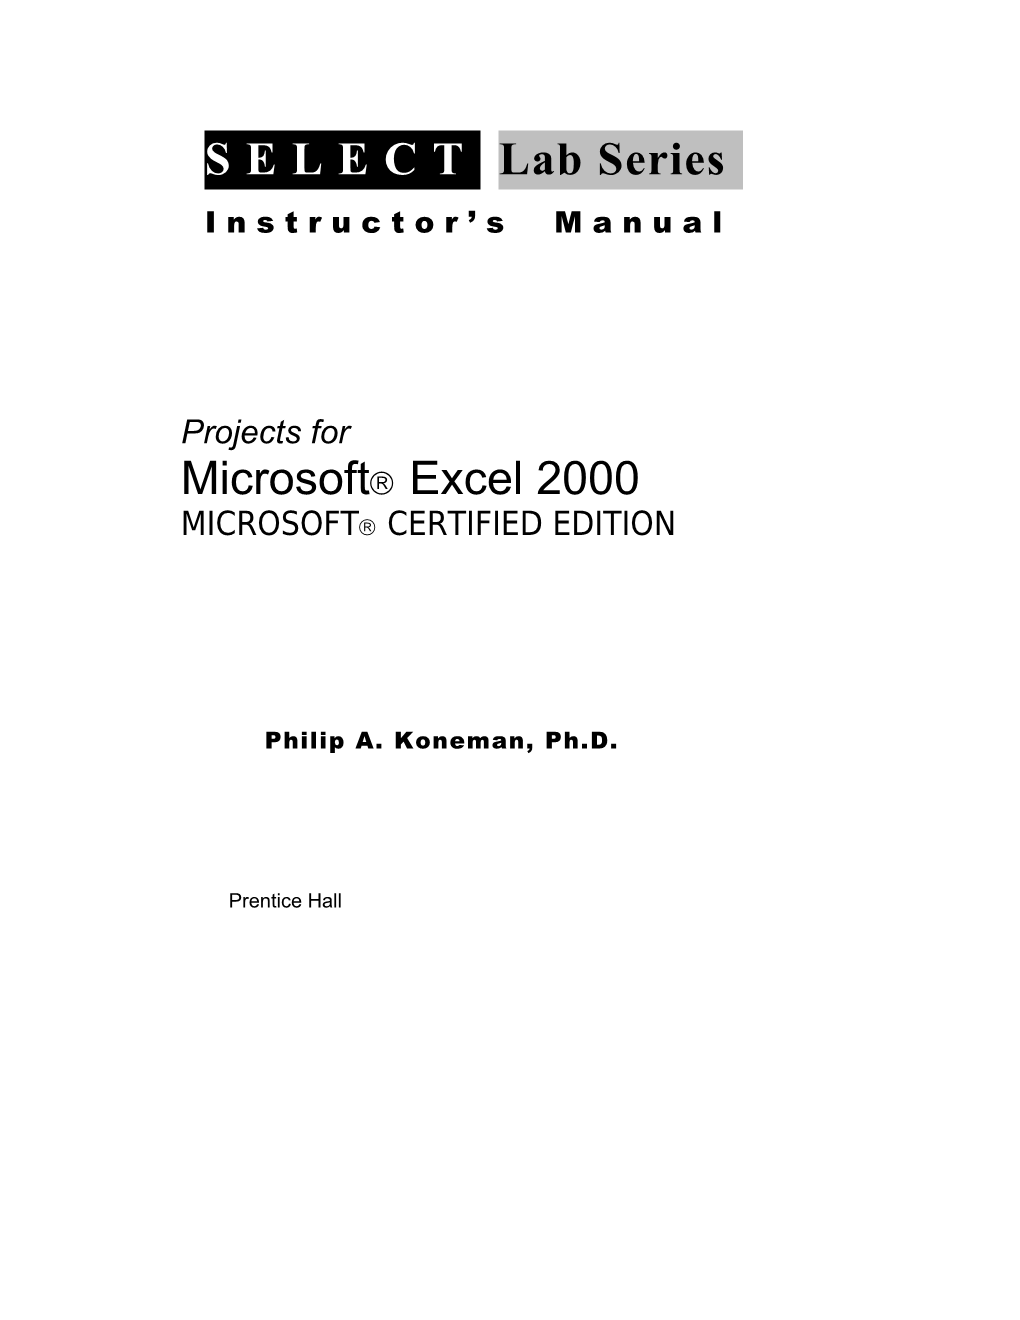 Projects for Microsoft Excel 2000 MICROSOFT CERTIFIED EDITION